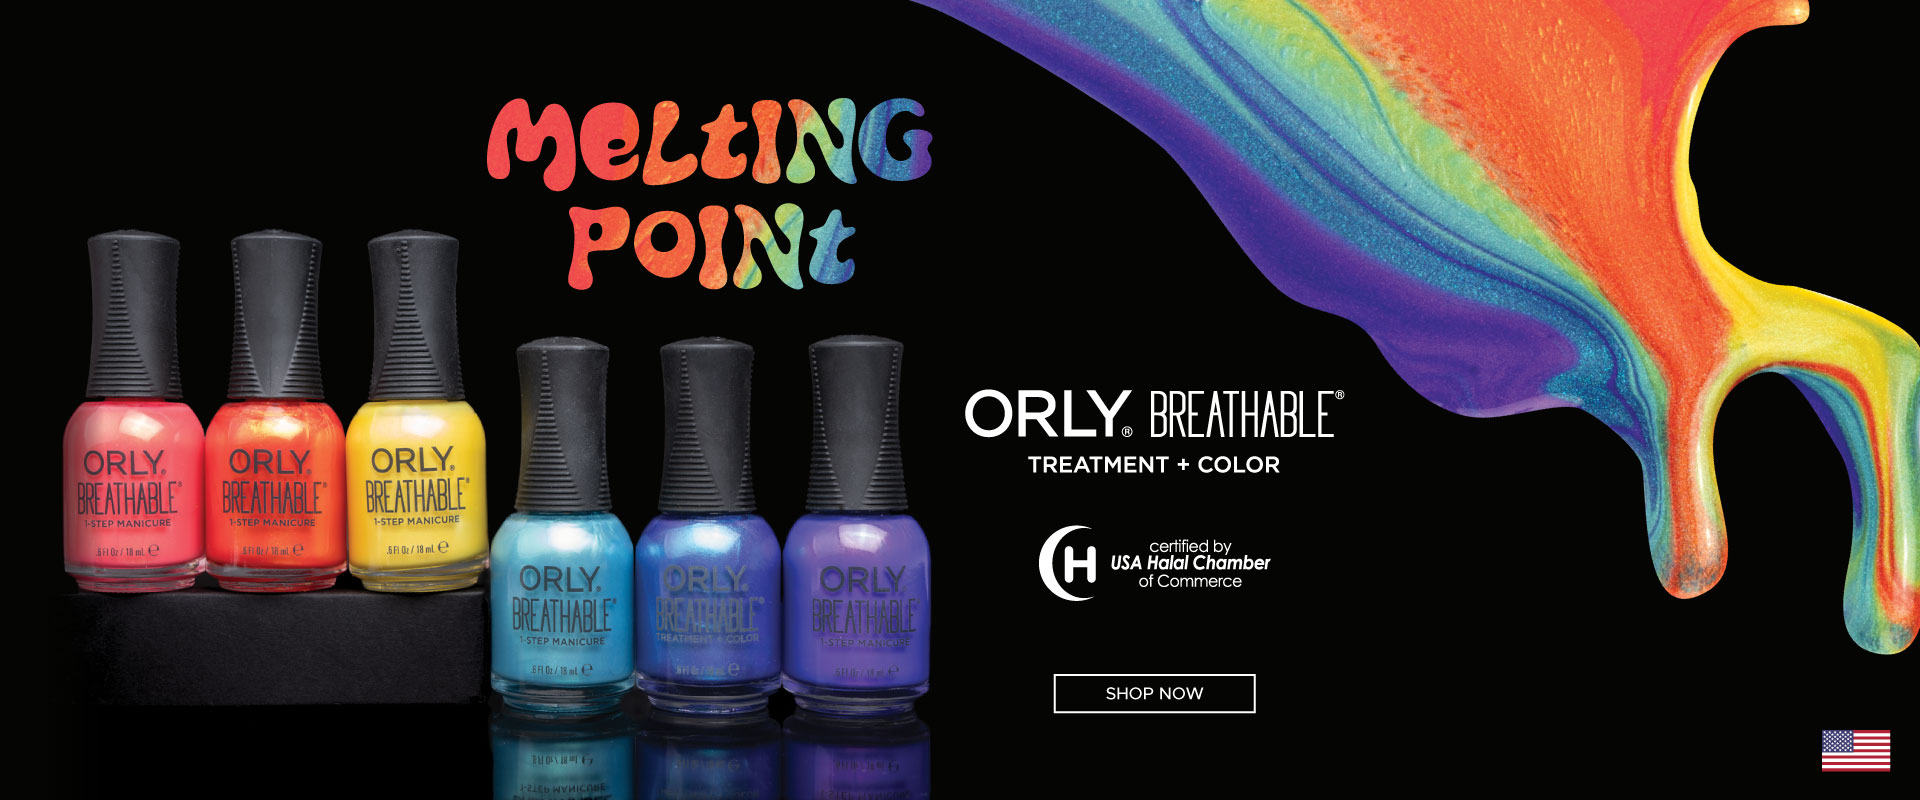 [Homepage] ORLY Melting Point